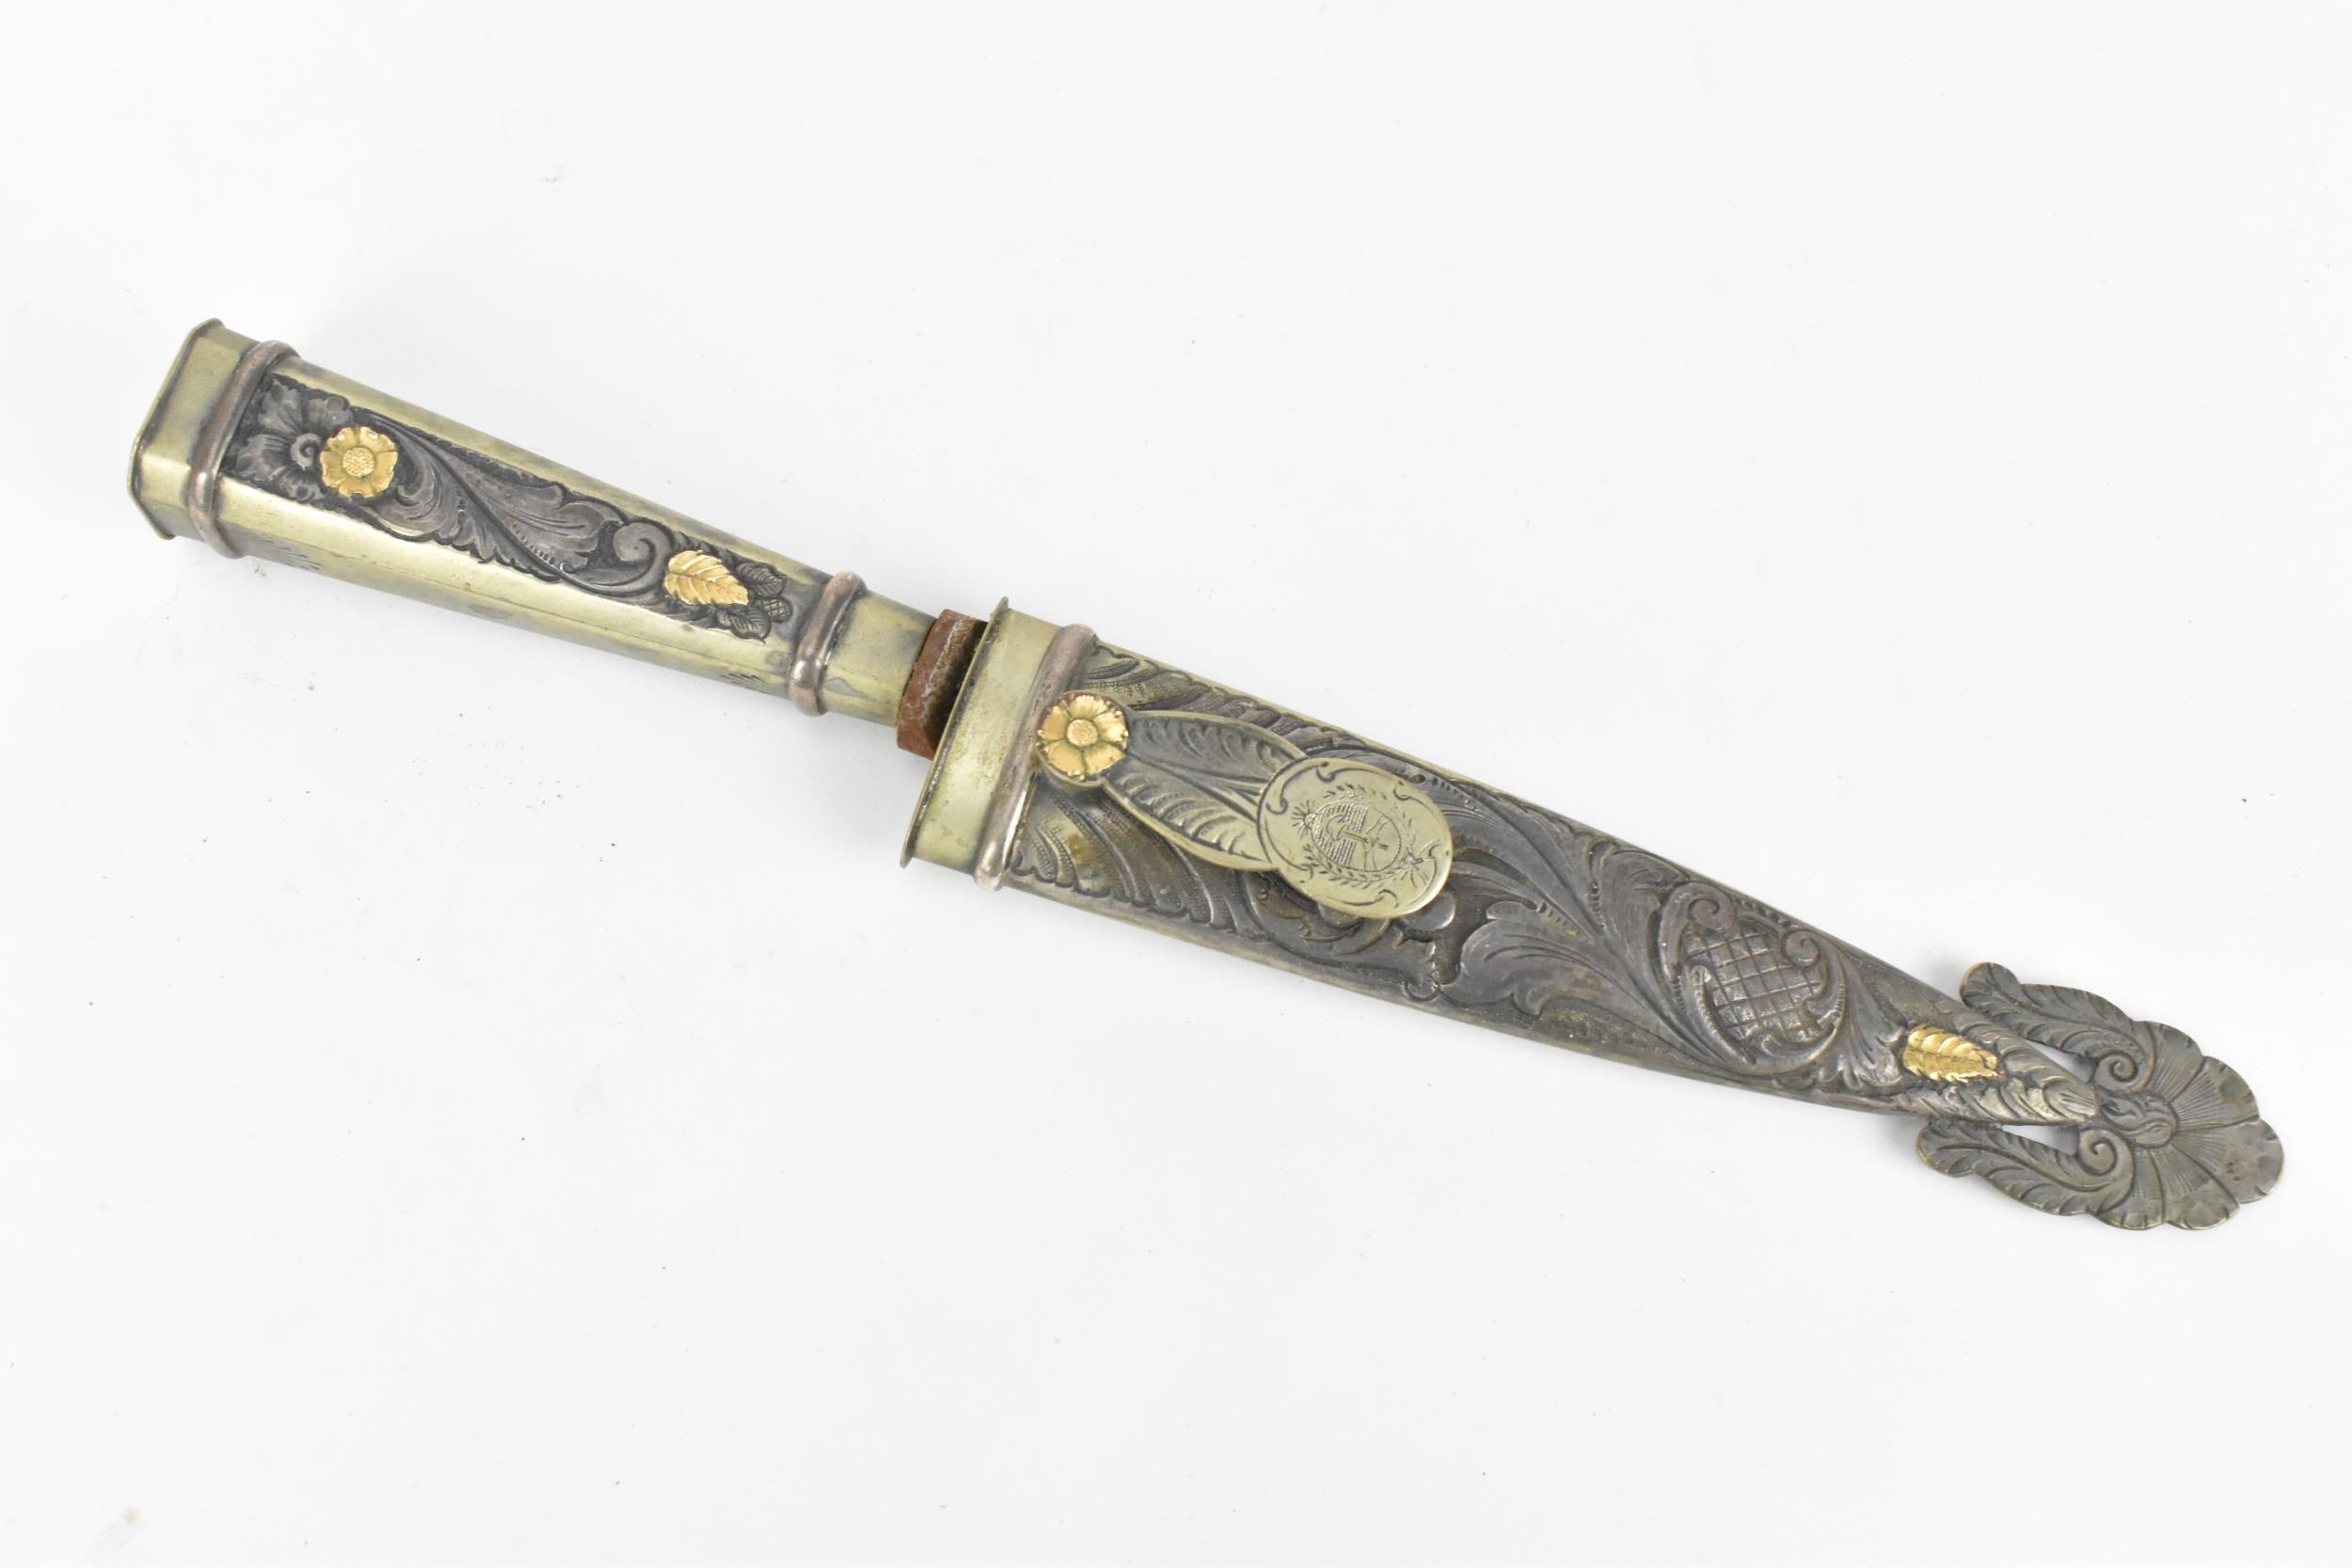 A German Heinr Boker and Co Soligen-Alemania Gaucho knife/dagger, with floral and acanthus etched